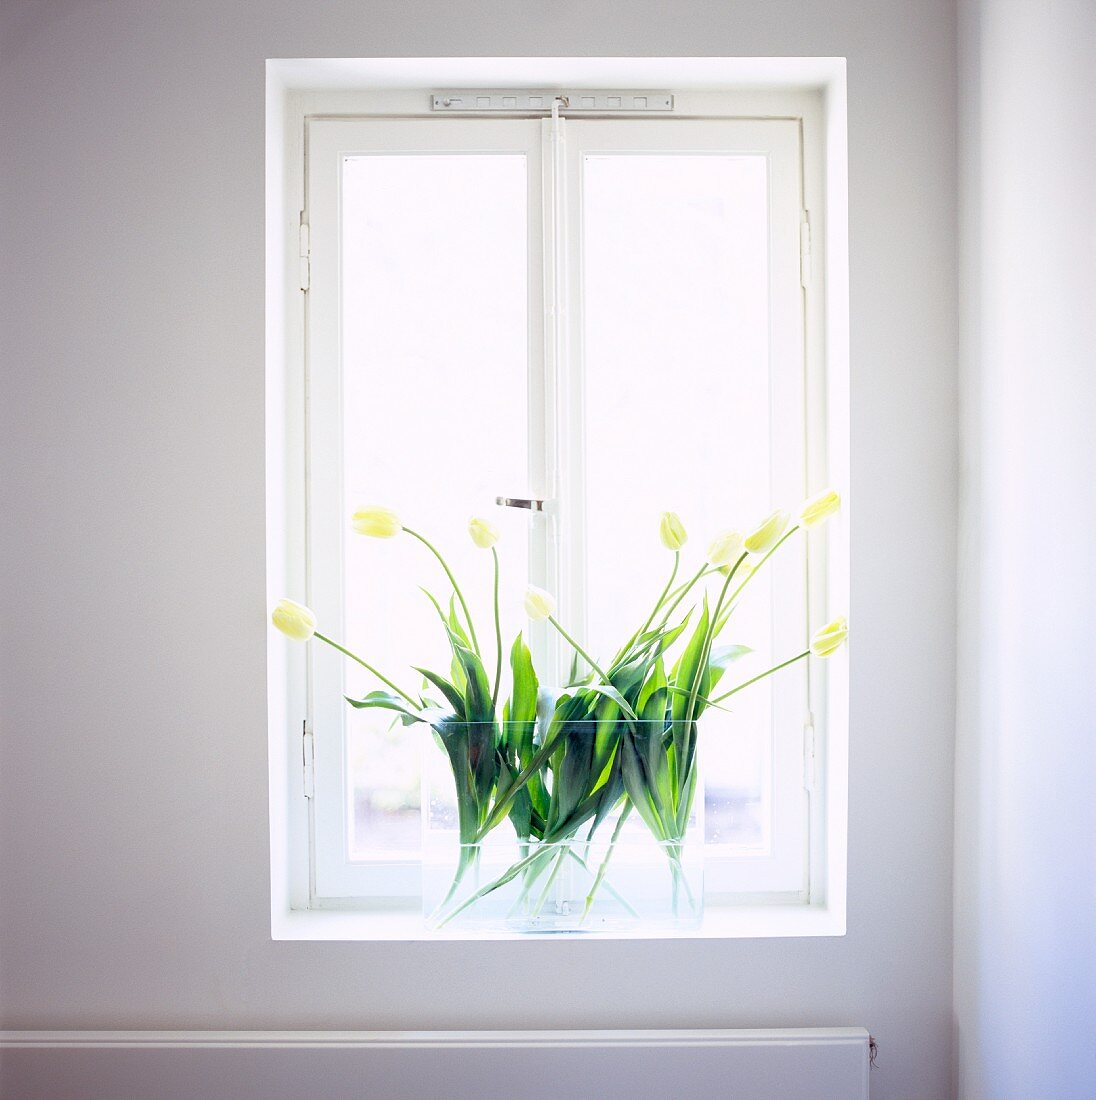 Window niche with yellow tulips in a glass vase